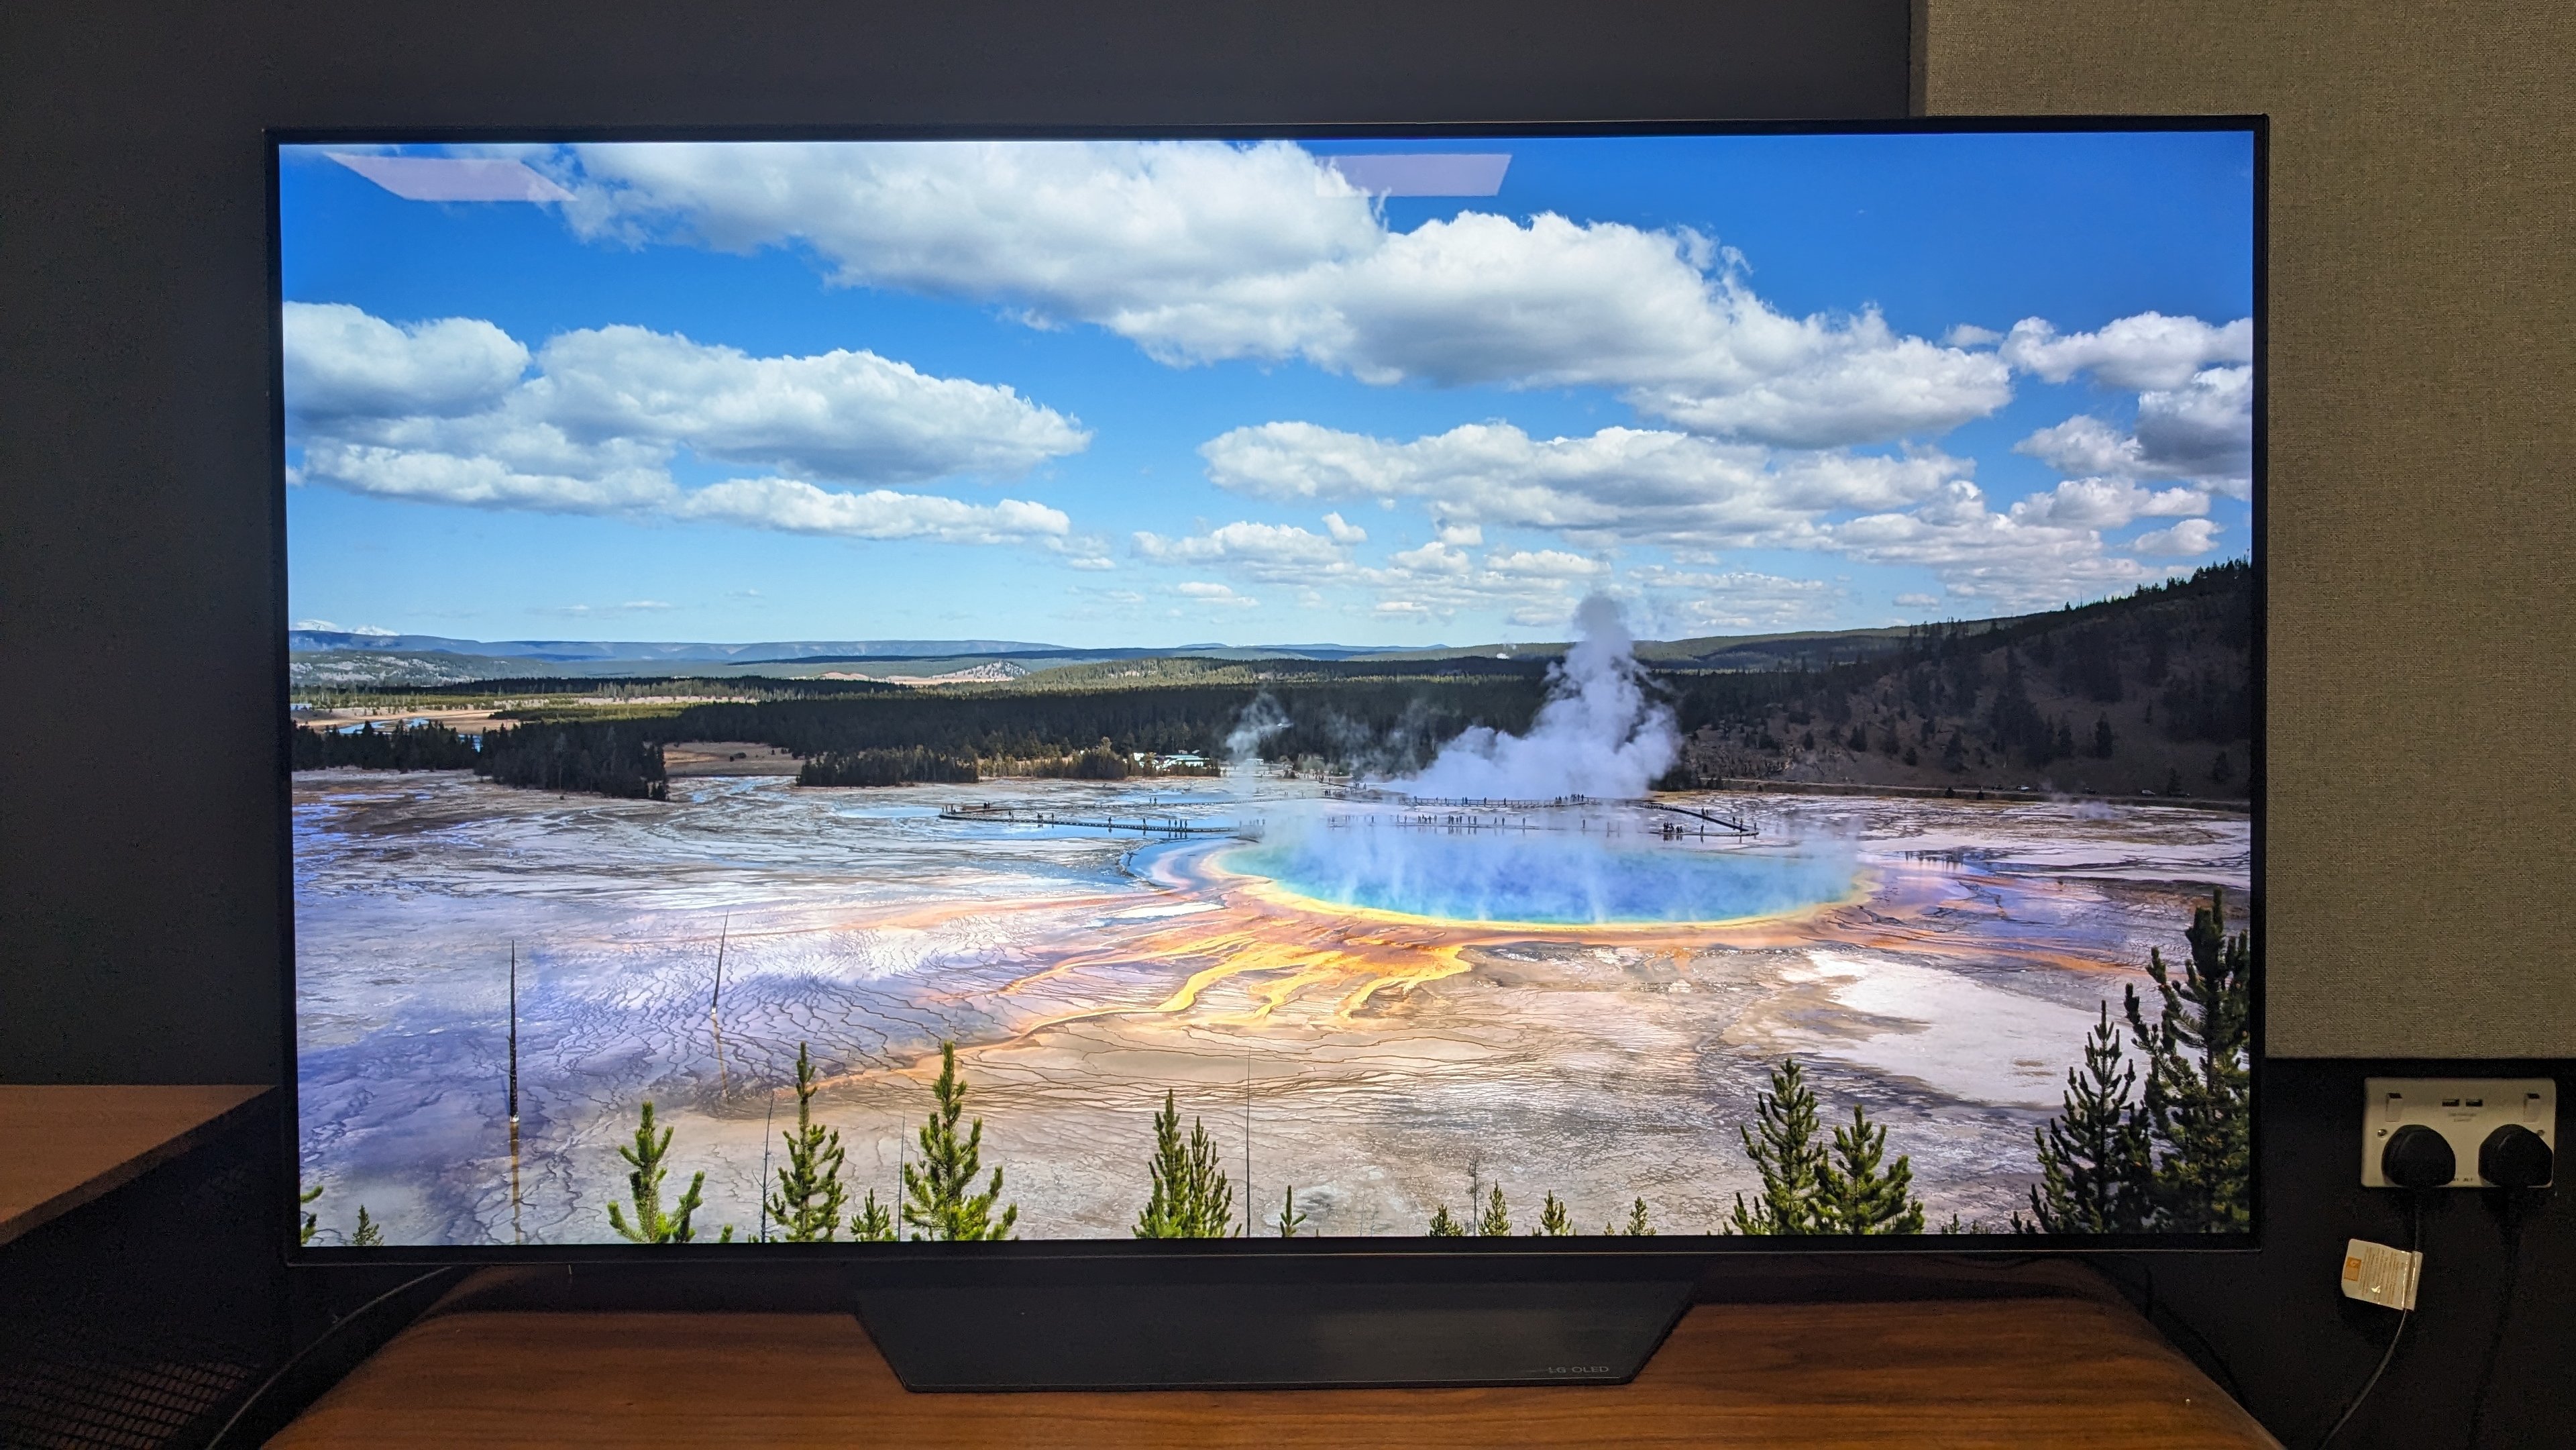 LG B3 with bright image of hot spring on screen